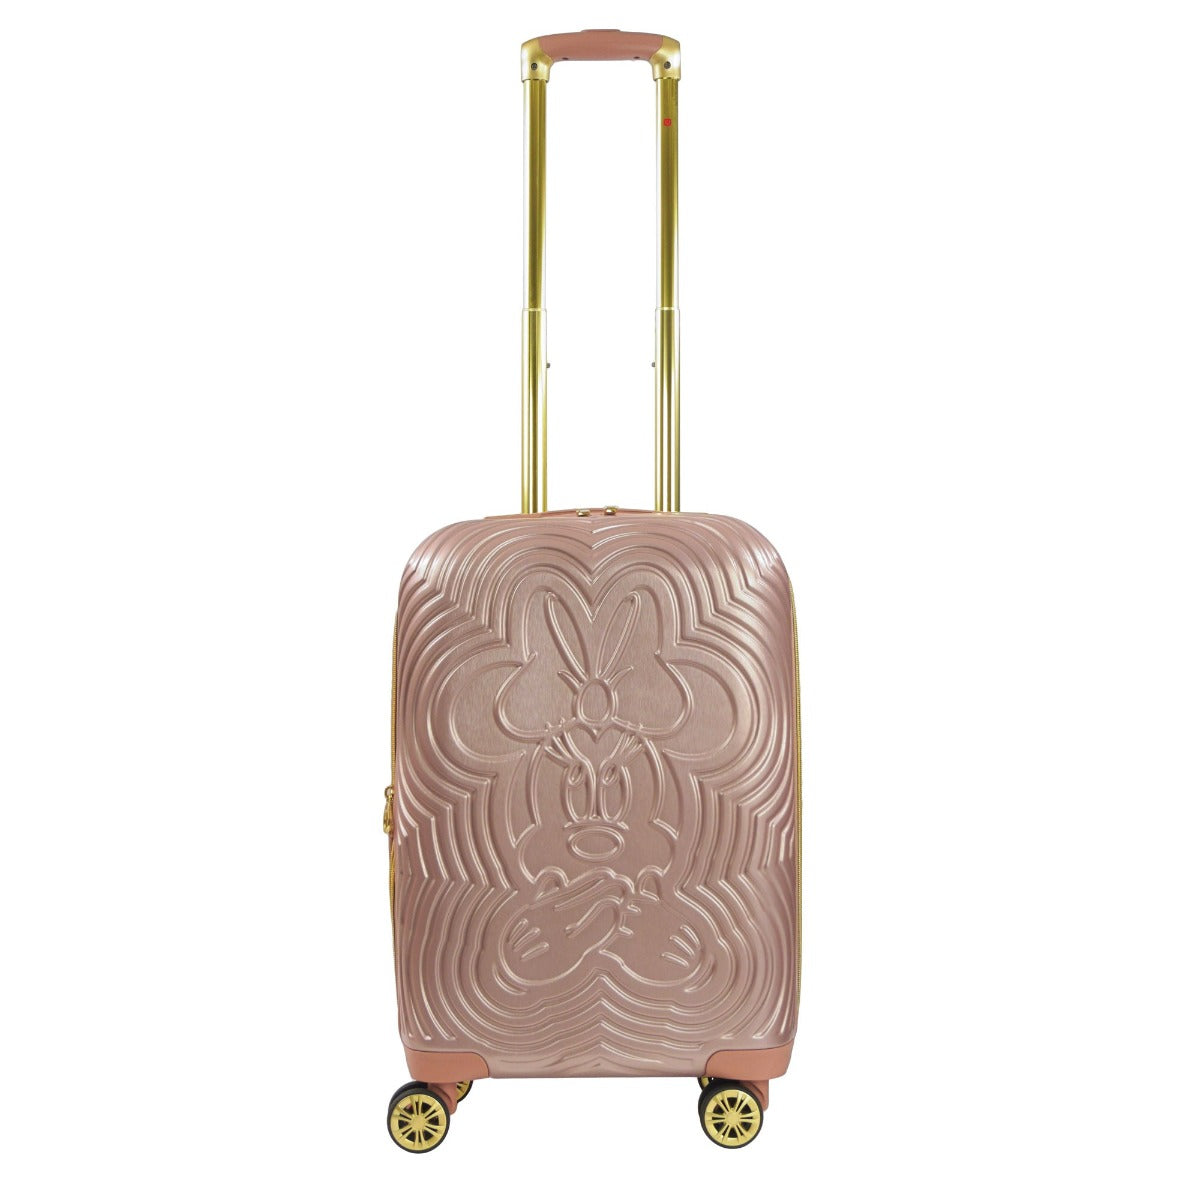 Disney Ful Playful Minnie Mouse 22 inch carry on expandable spinner suitcase hard sided luggage rose gold